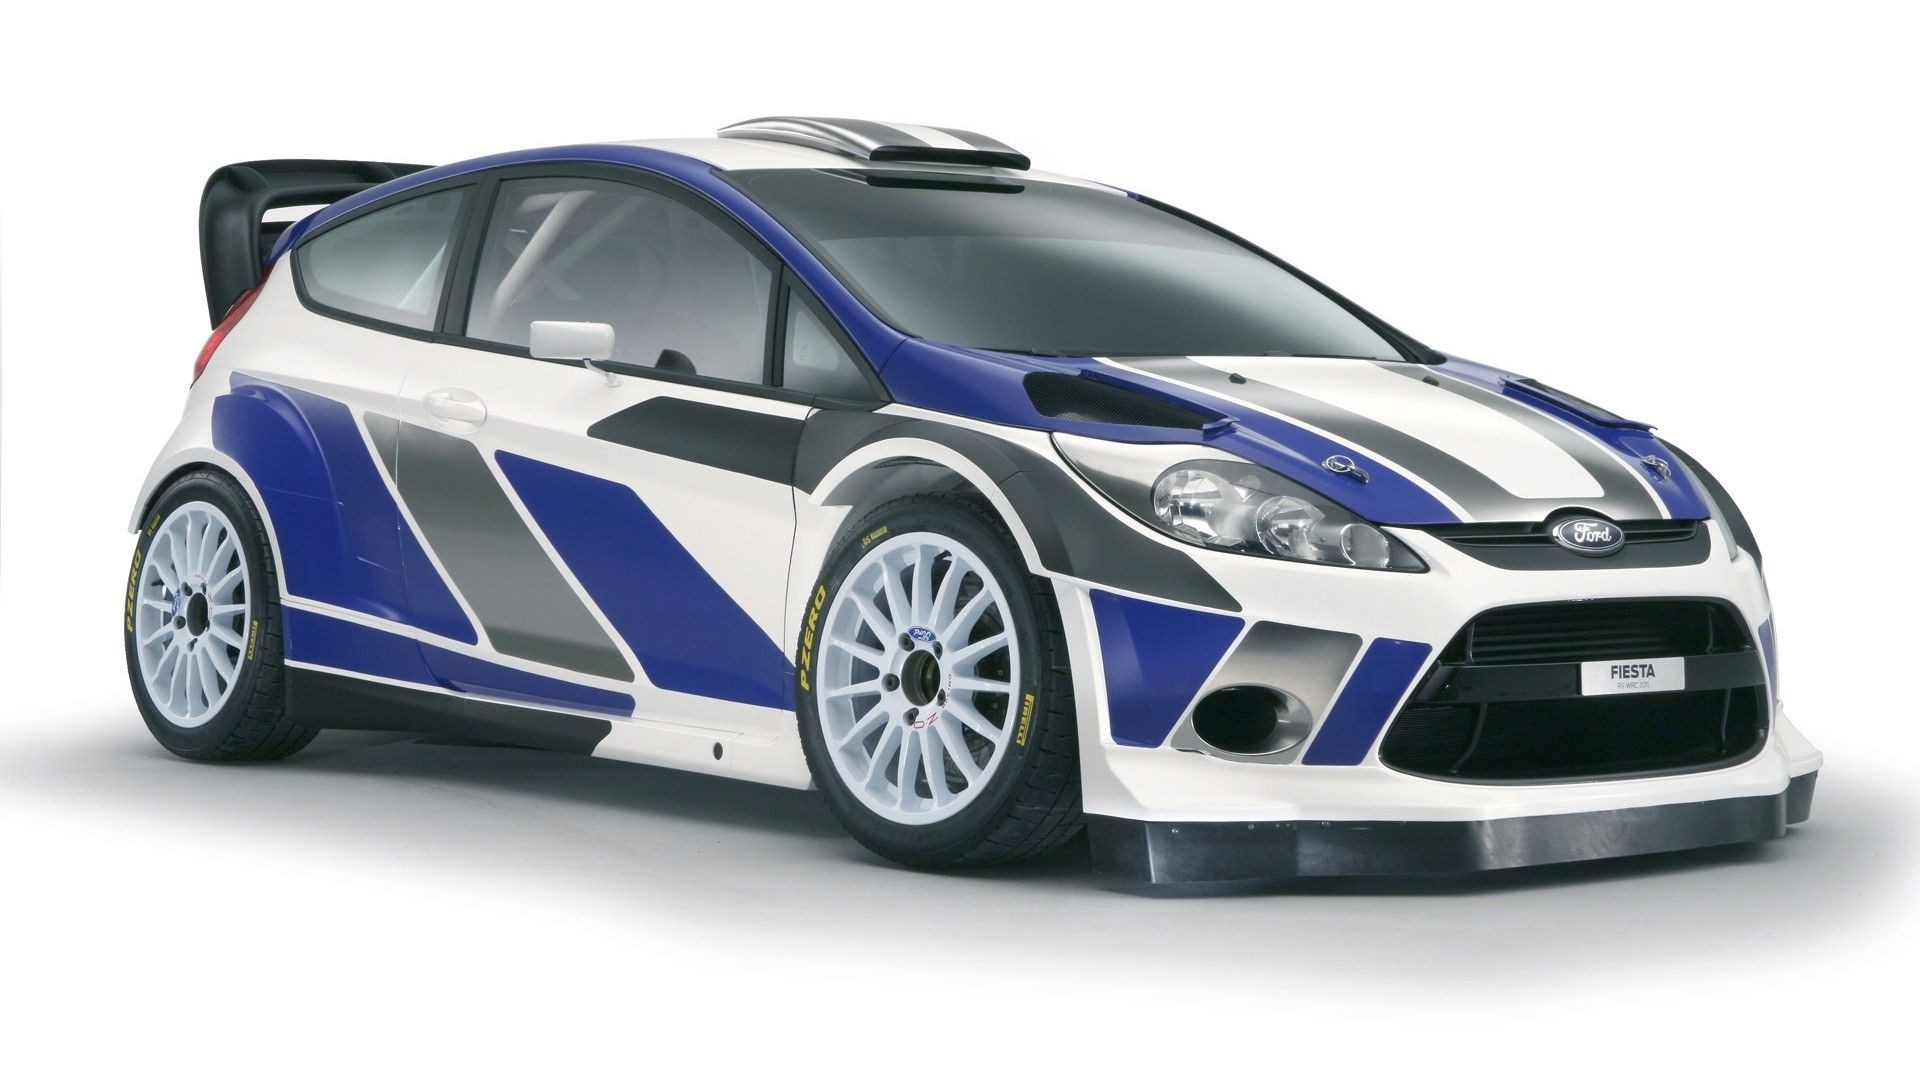 General 1920x1080 car vehicle Ford Fiesta Ford white background simple background livery British cars hatchbacks hot hatch